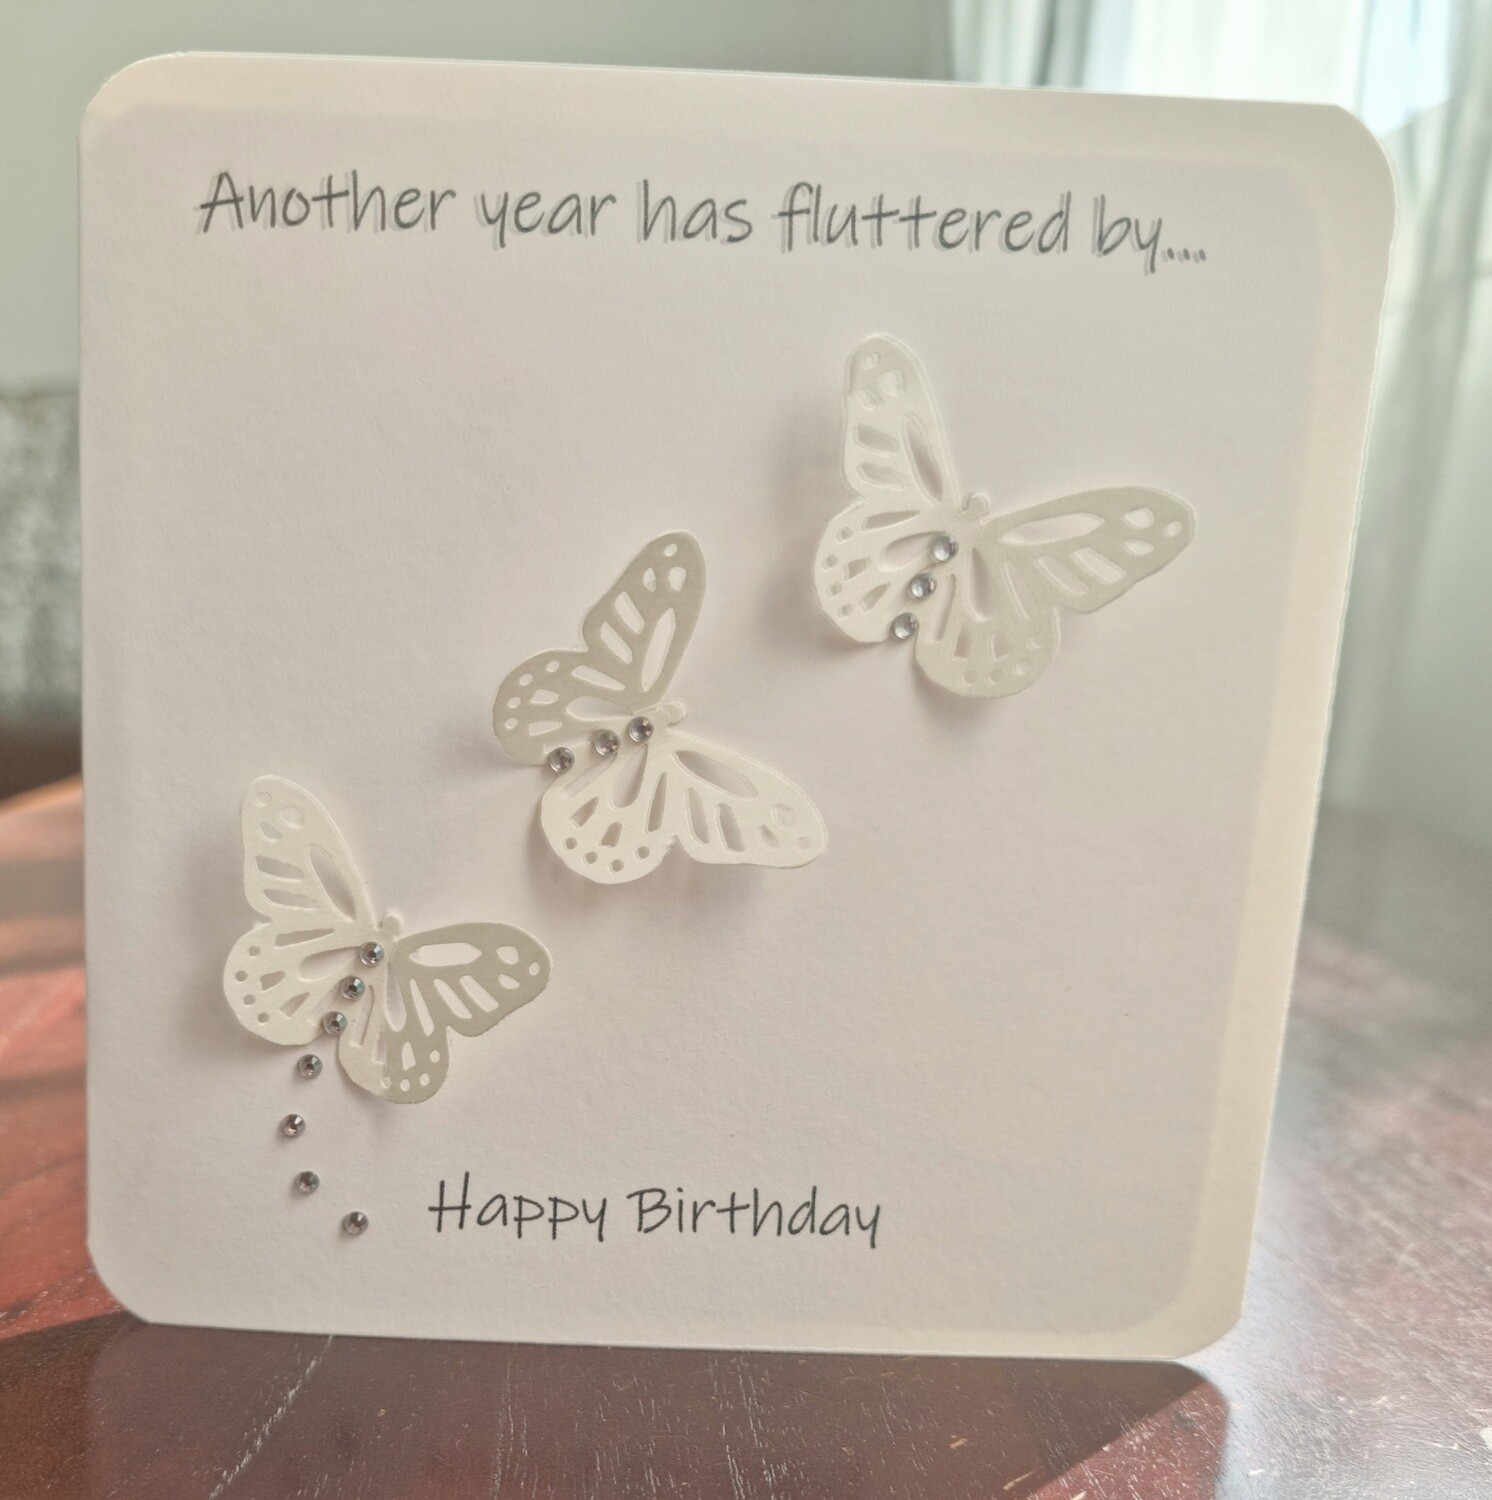 Another year has Fluttered by!  - Birthday card